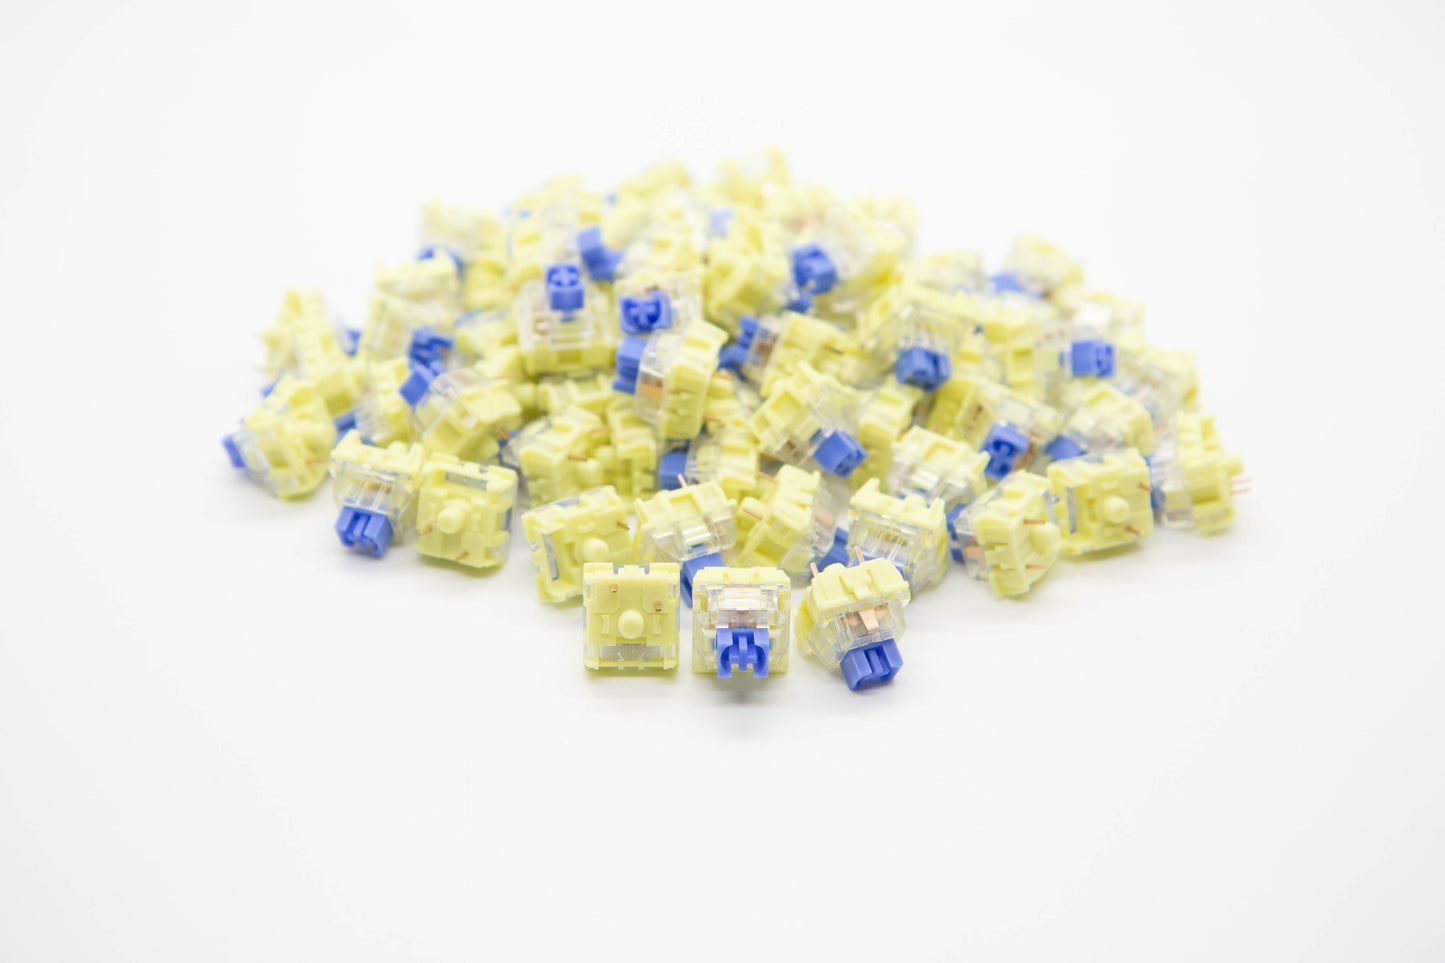 Close-up shot of a pile of TTC Golden Blue mechanical keyboard switches featuring yellow and transparent housing and blue stems